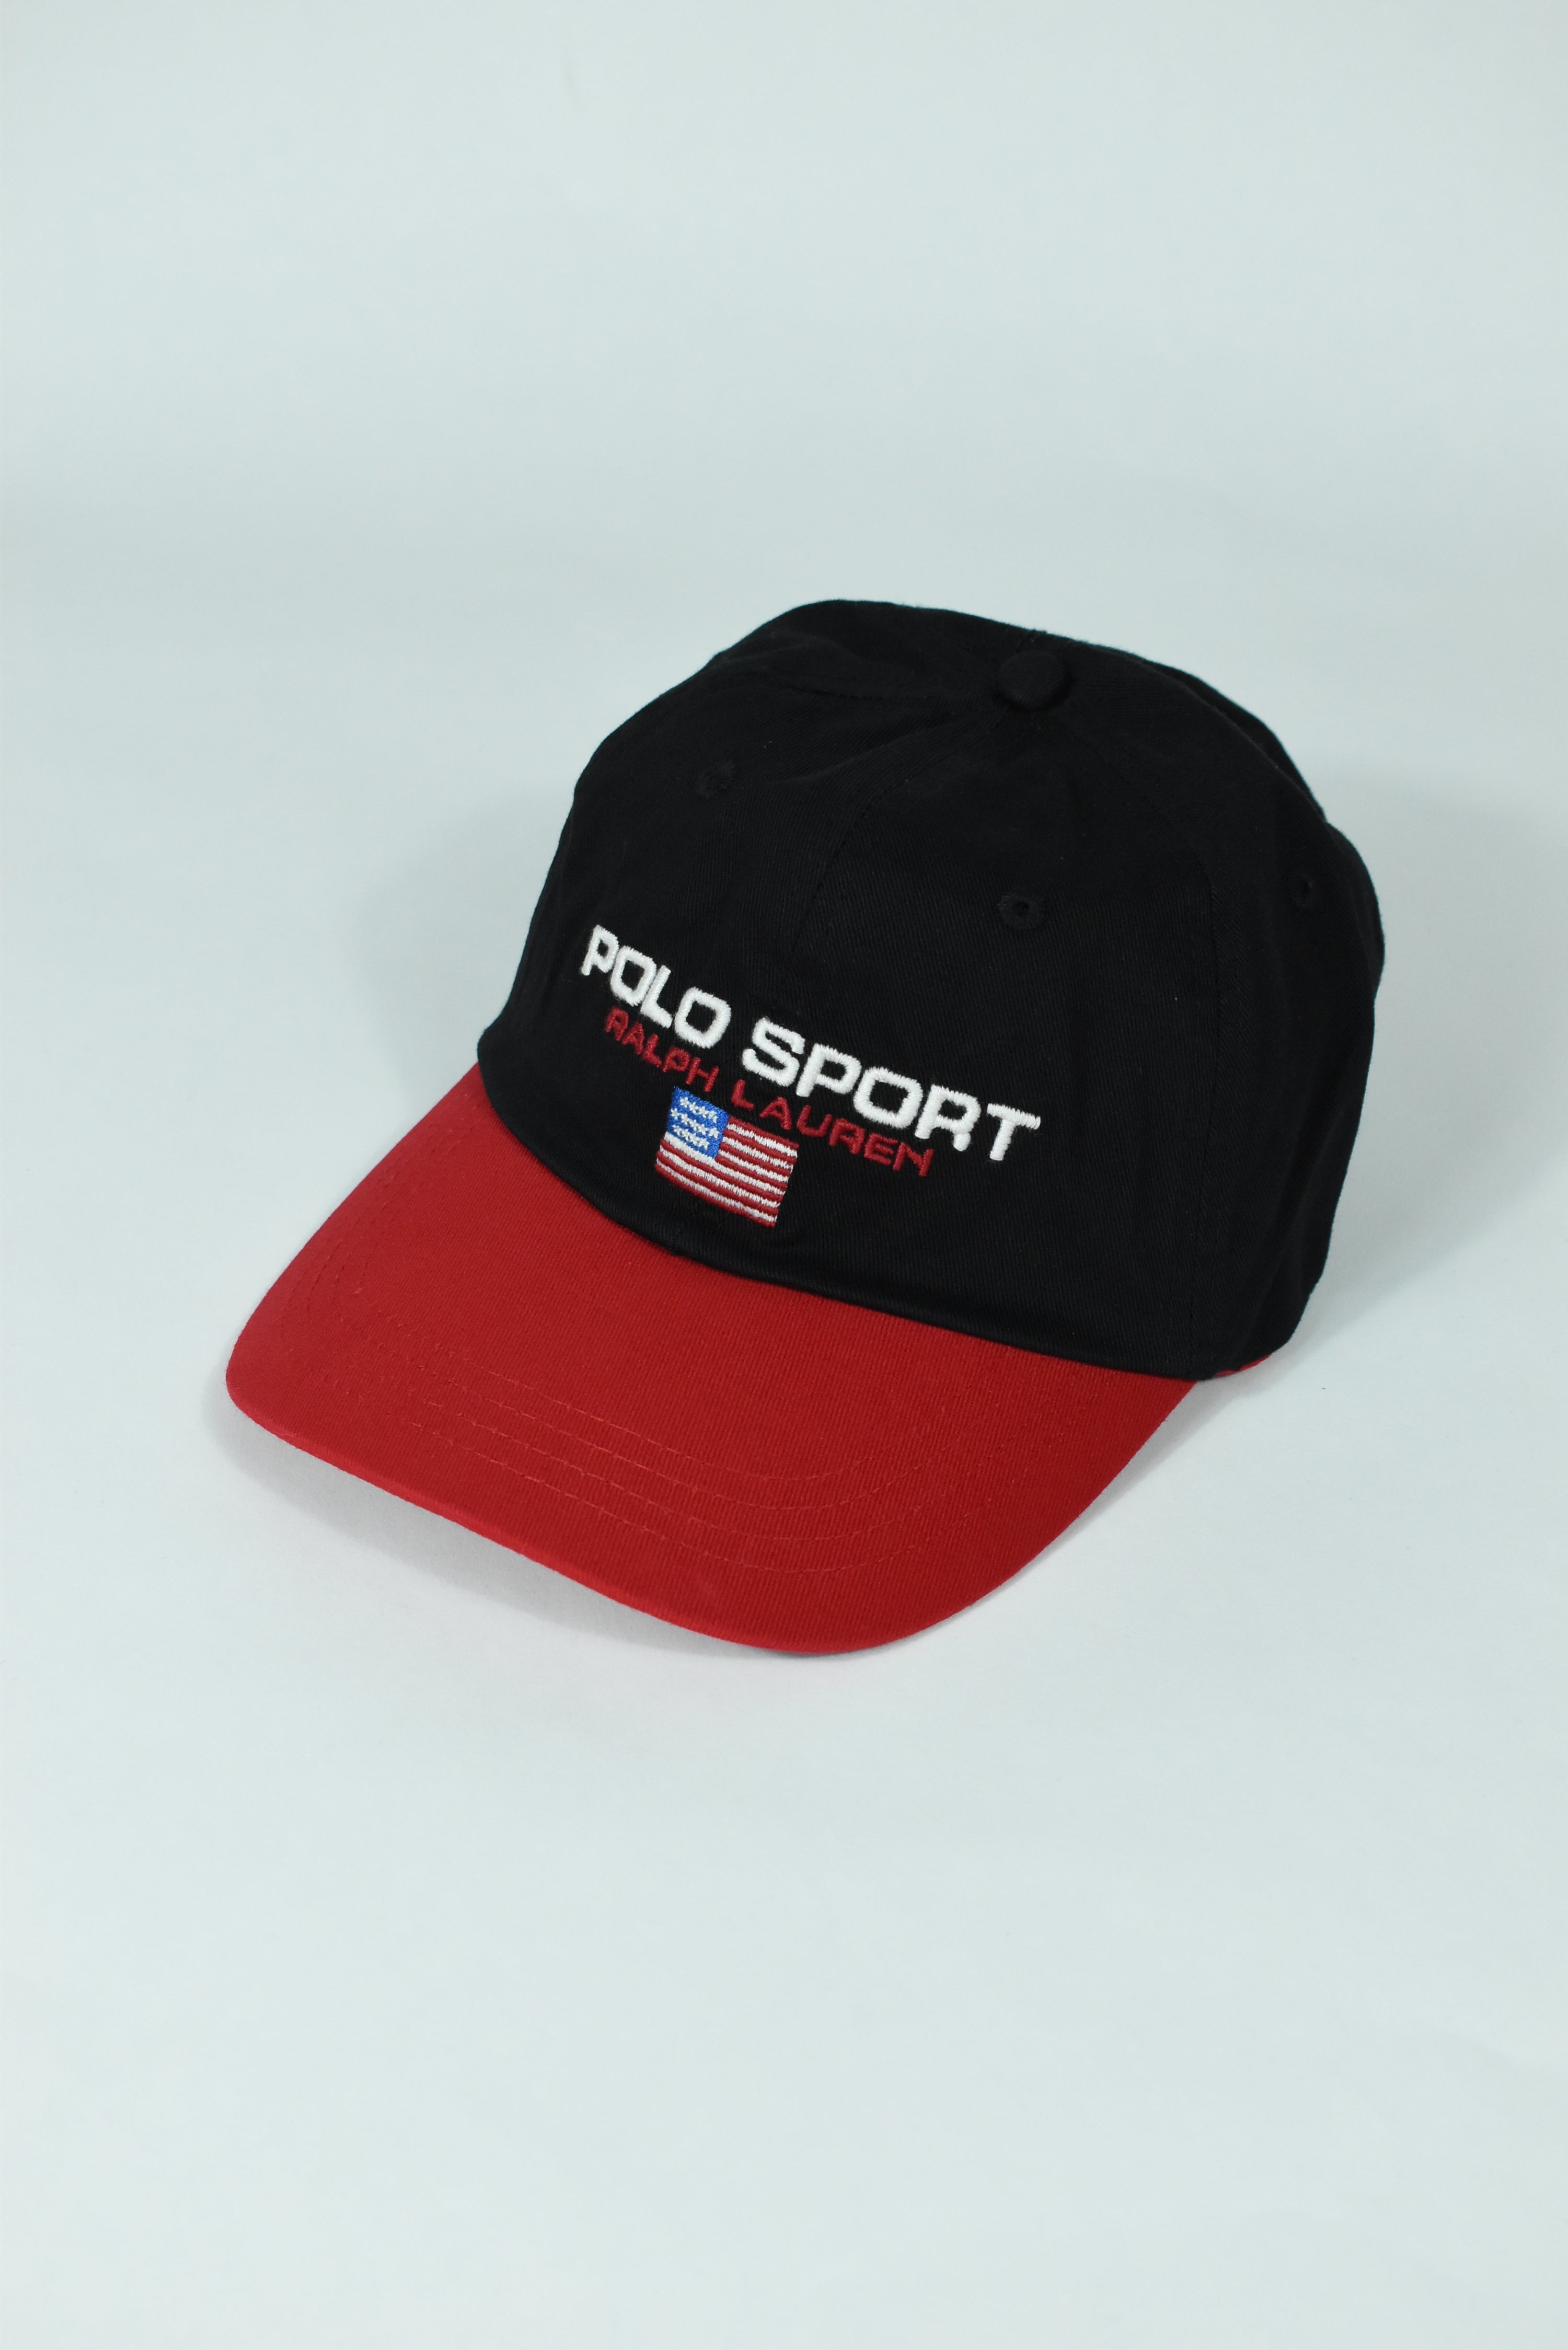 New Black/Red RL Polo Sport Embroidery Cap